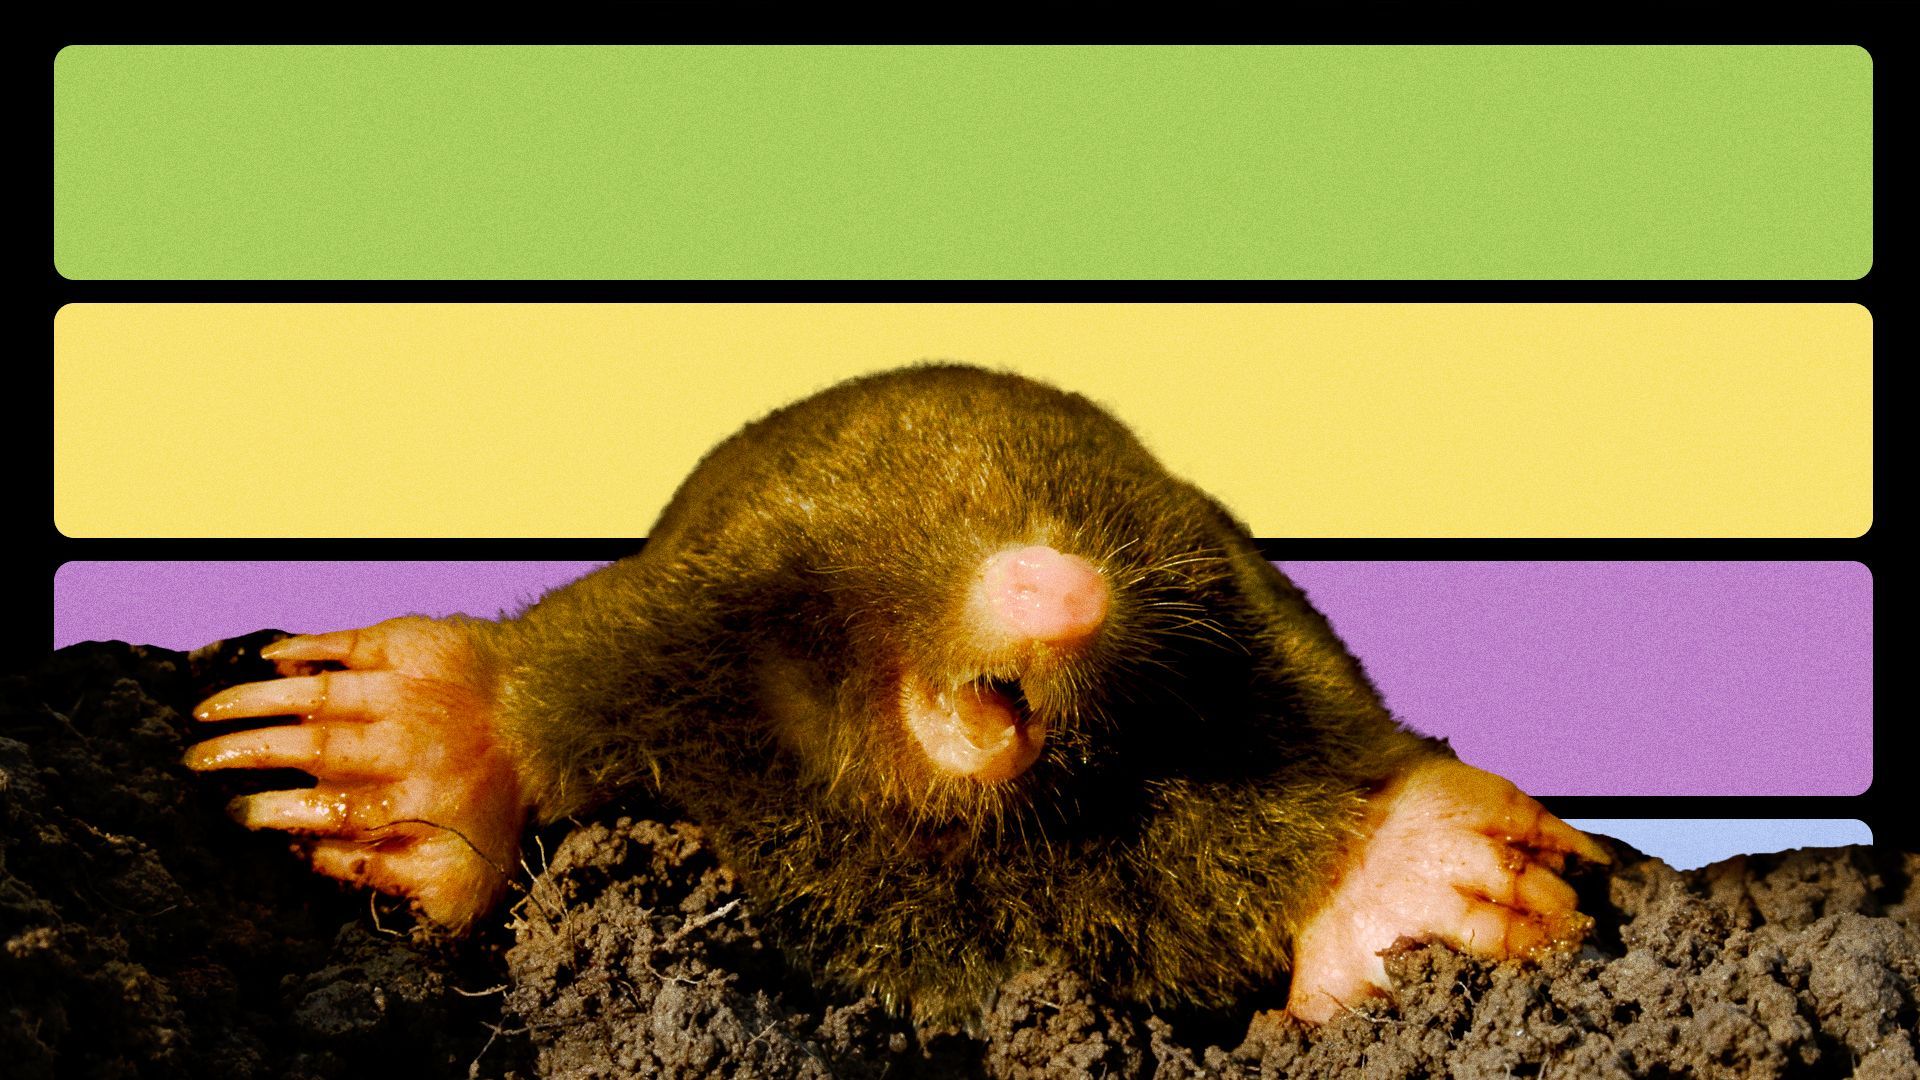 Illustration of a mole in front of green, yellow, blue and purple bars.